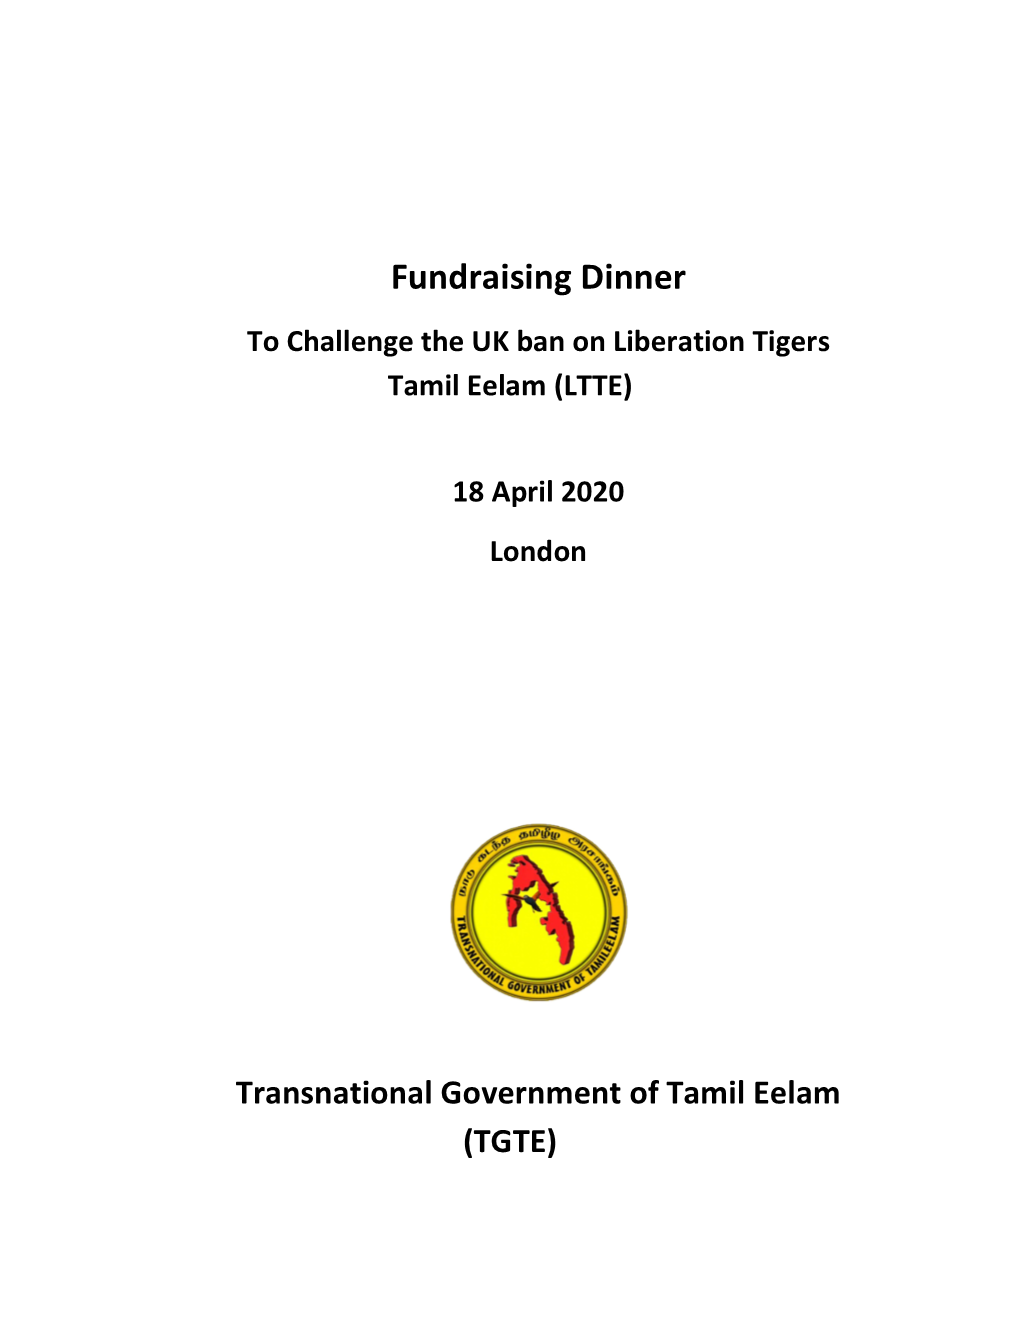 Fundraising Dinner to Challenge the UK Ban on Liberation Tigers Tamil Eelam (LTTE)